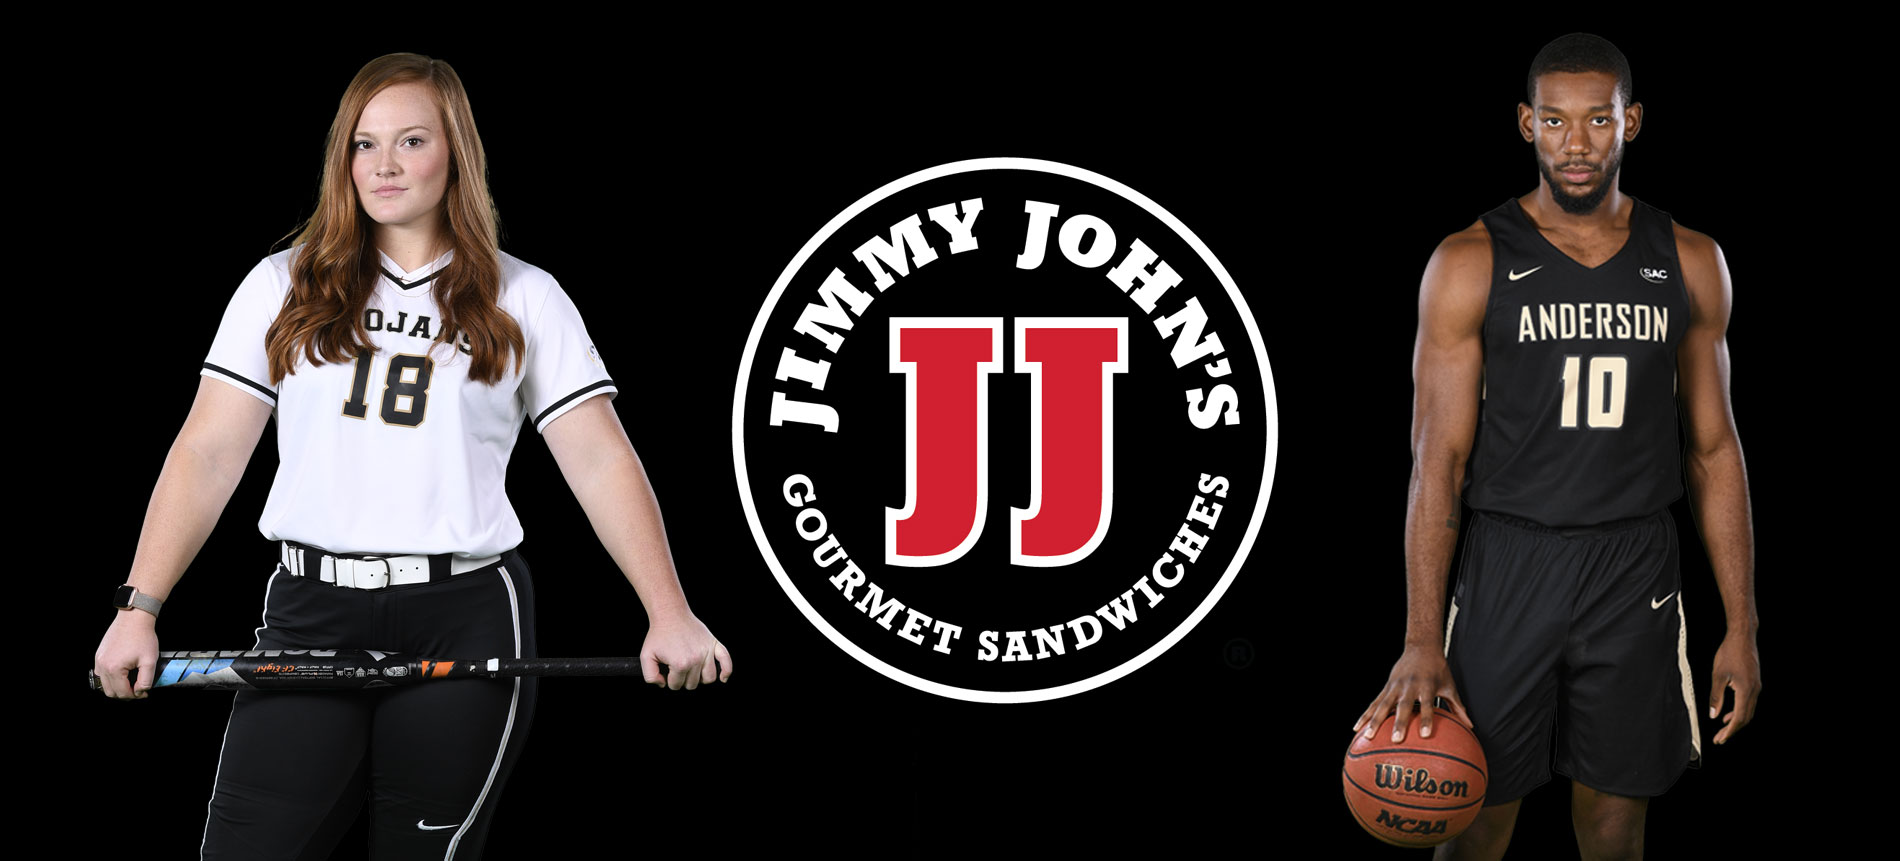 Boatner and Dortch Named Jimmy John's Athletes of the Week